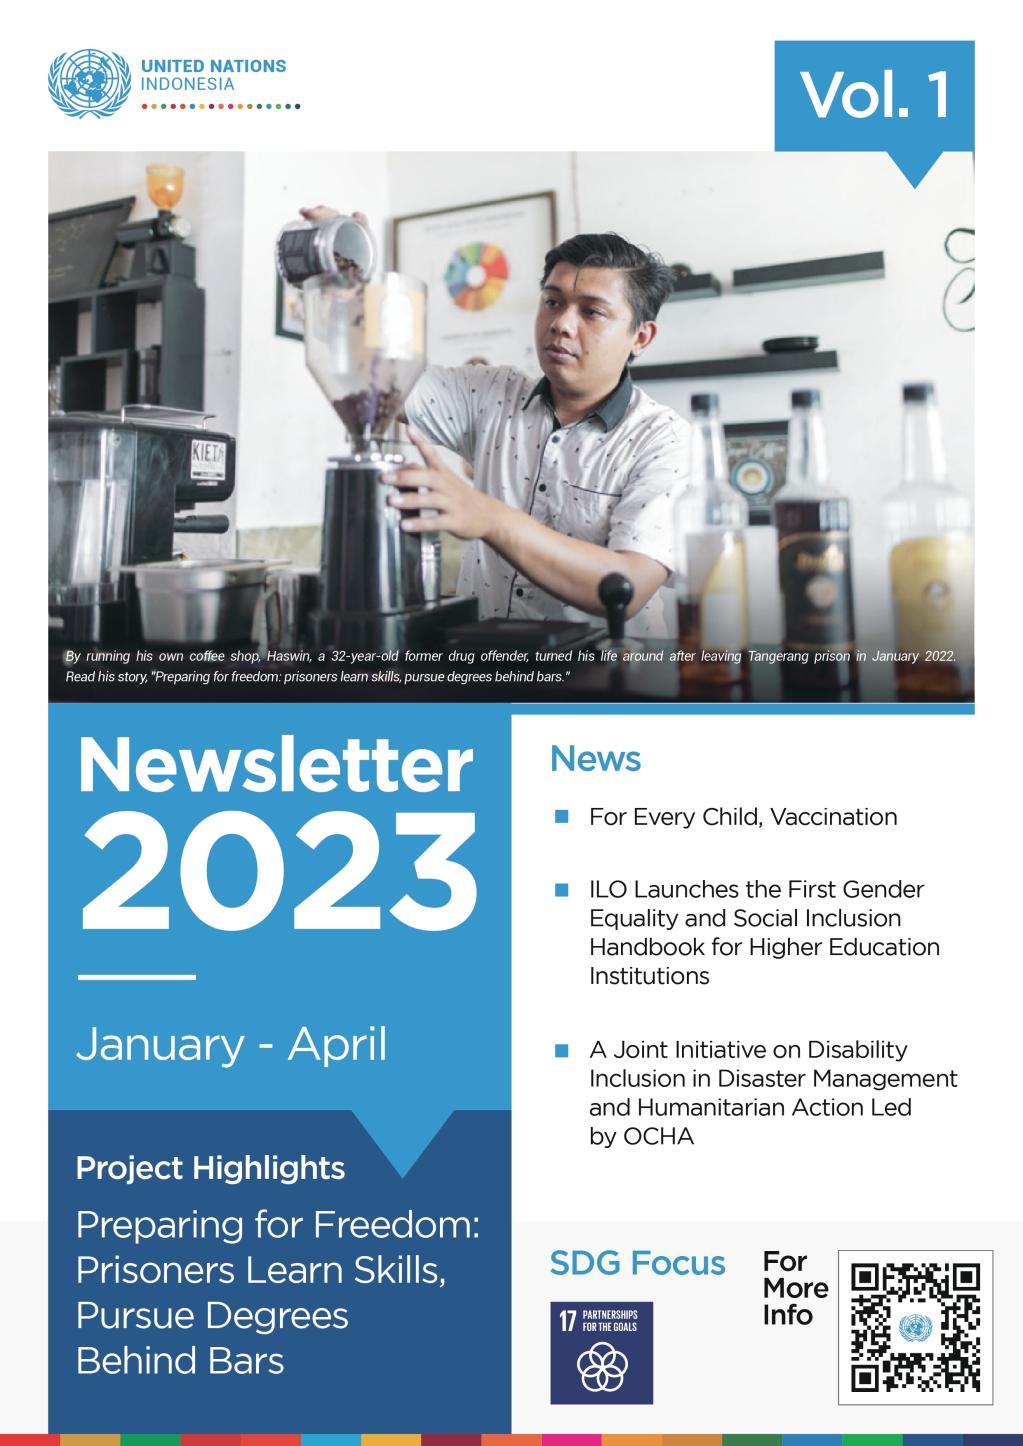 United Nations Information Center Indonesia Newsletter 2023 Volume 1 Cover